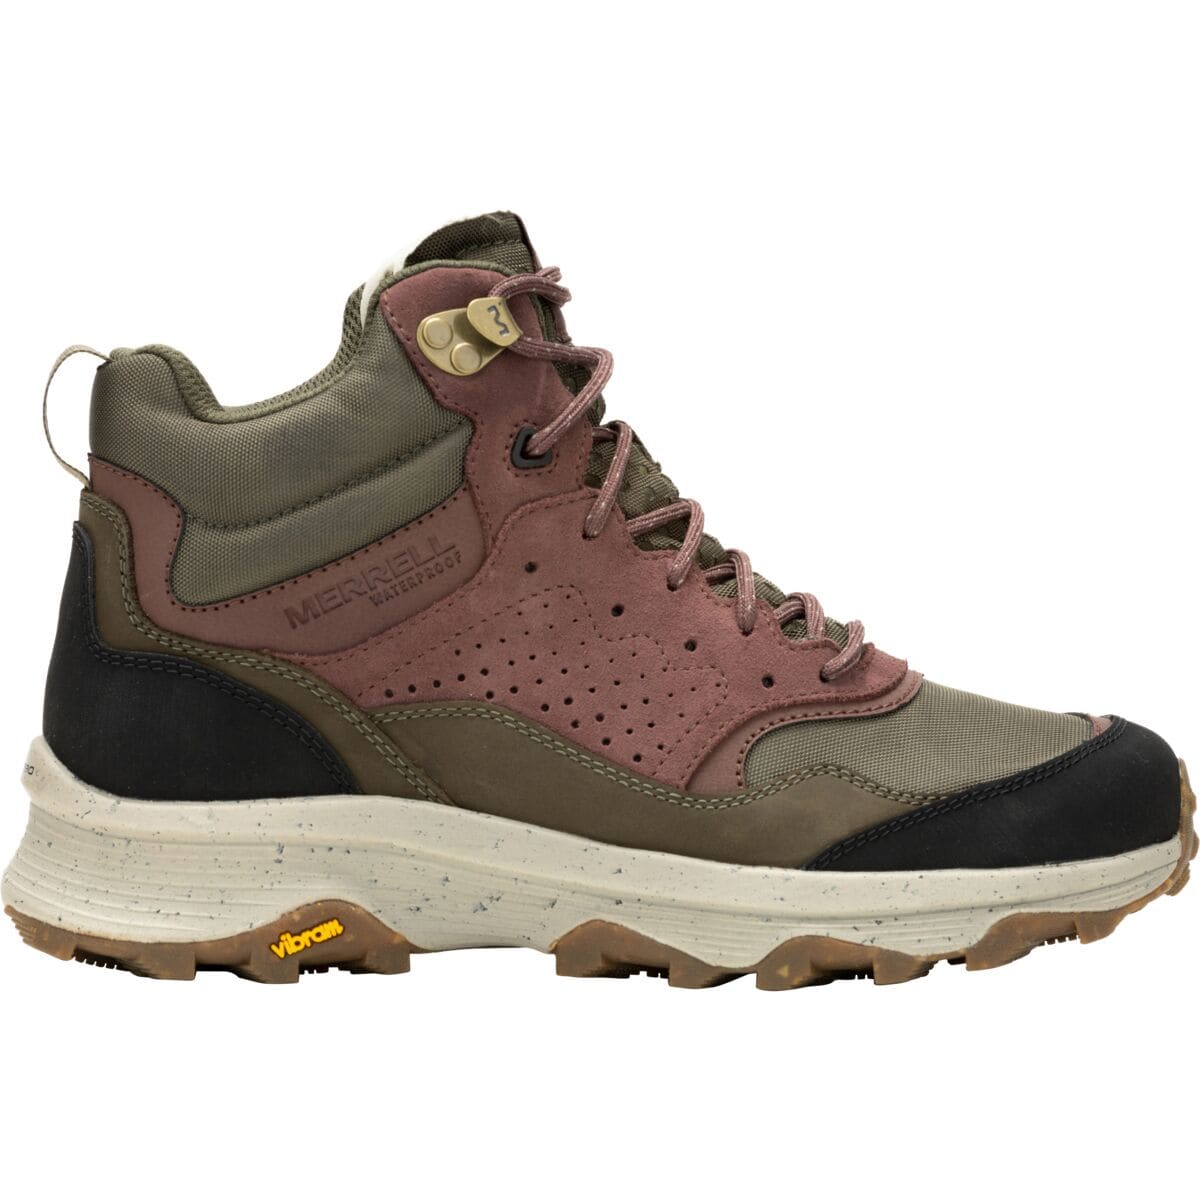 Speed Solo Mid WP Hiking Boot - Women